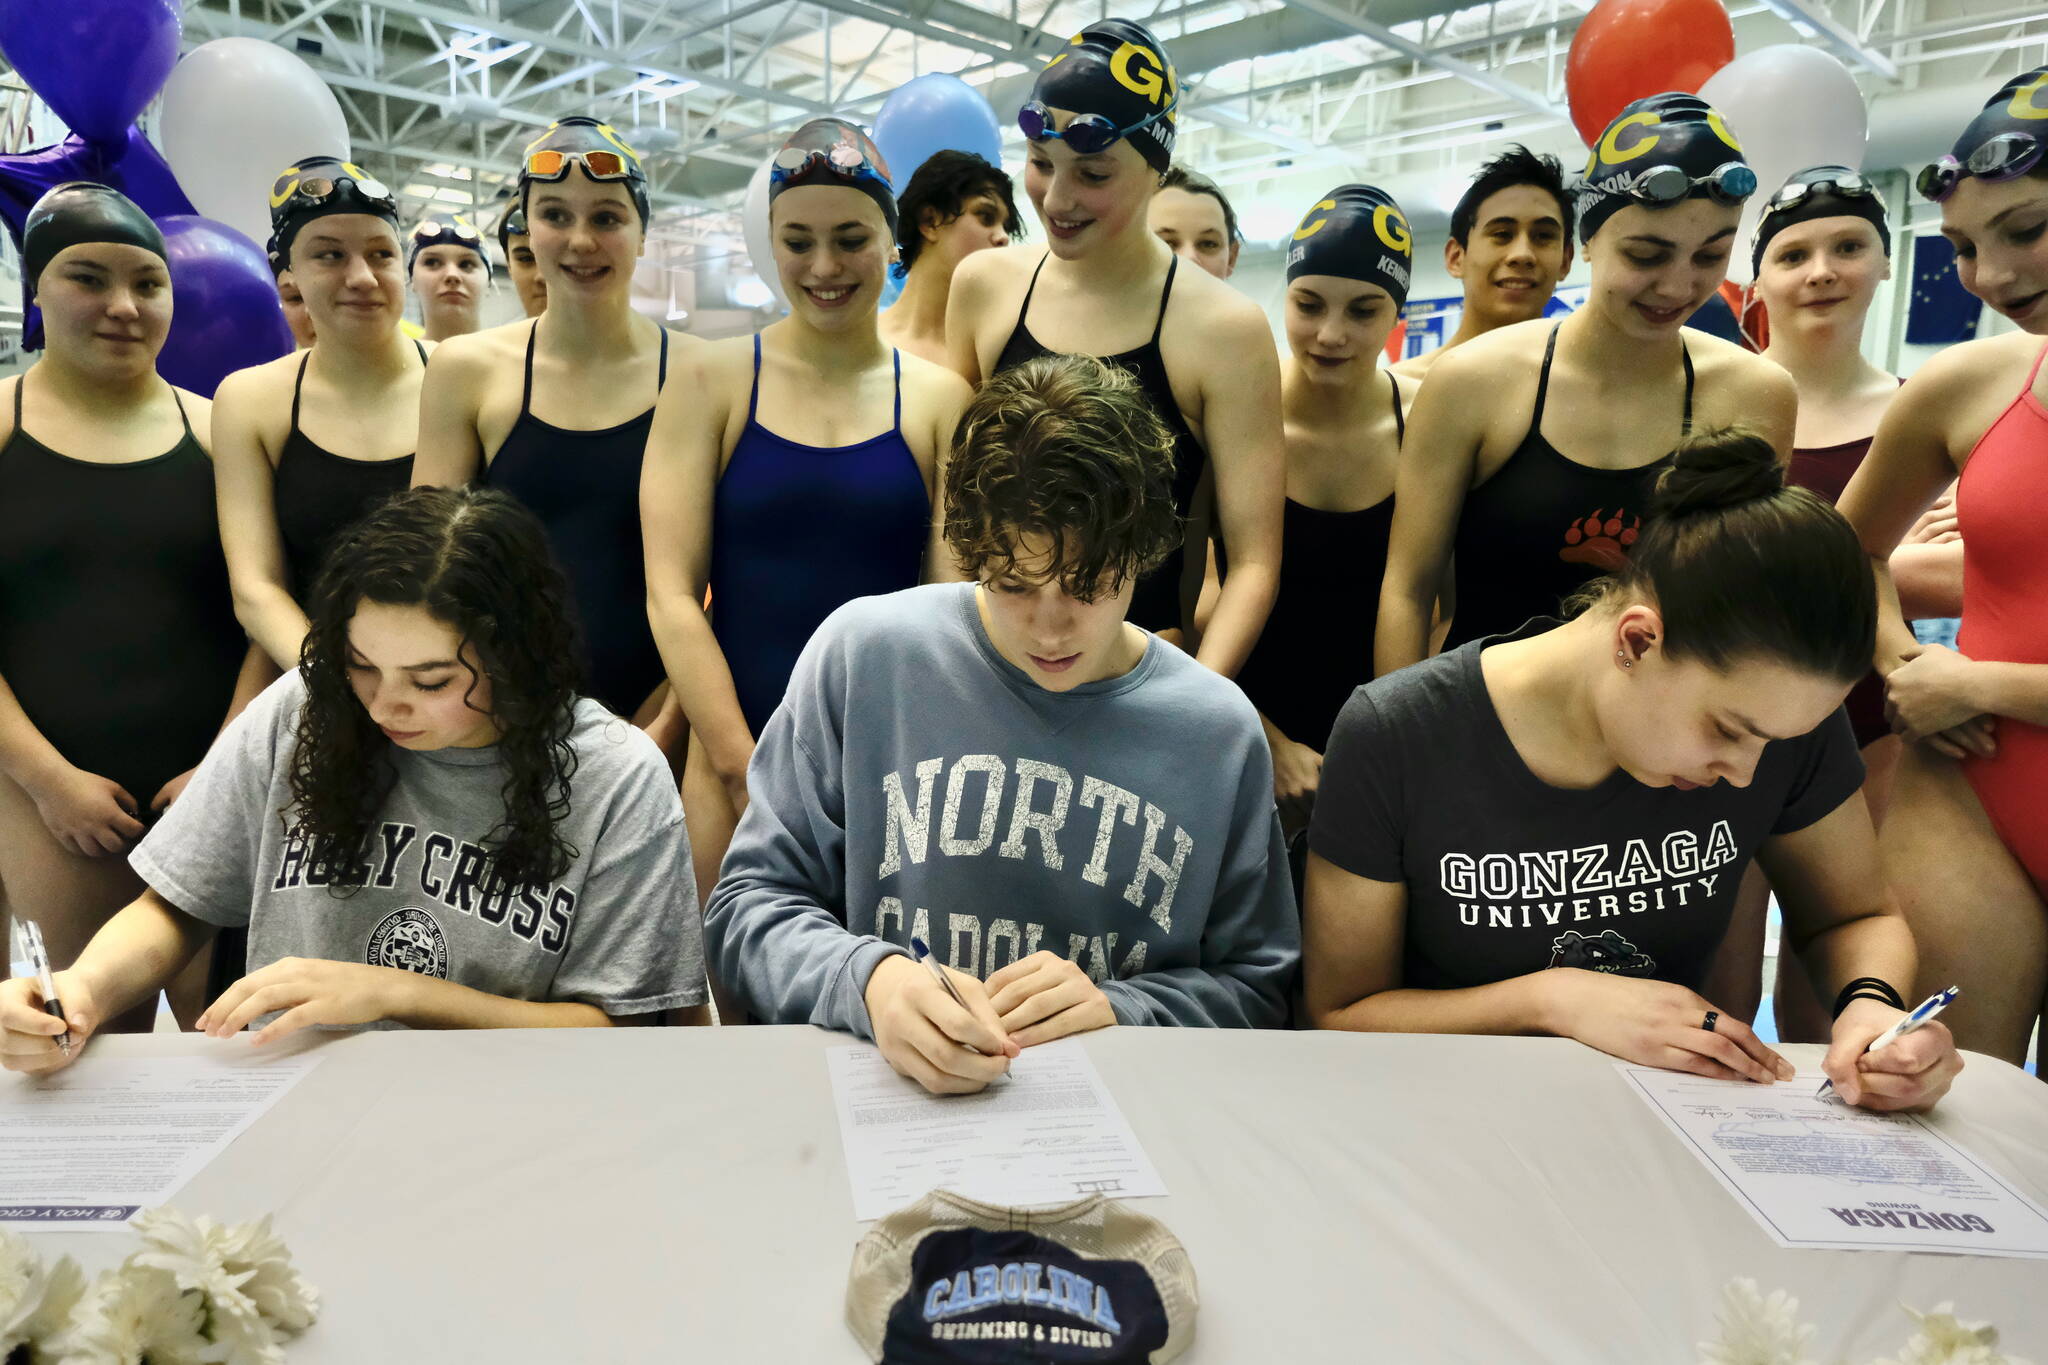 Juneau-Douglas High School: Yadaa.at Kalé senior Samantha Schwarting and Thunder Mountain High School seniors PJ Foy and Olivia Mills (shown with Glacier Swim Club teammates) sign National Letters of Intent (NLI) on Tuesday at the Dimond Park Aquatic Center to swim and study in college. (Klas Stolpe for the Juneau Empire)